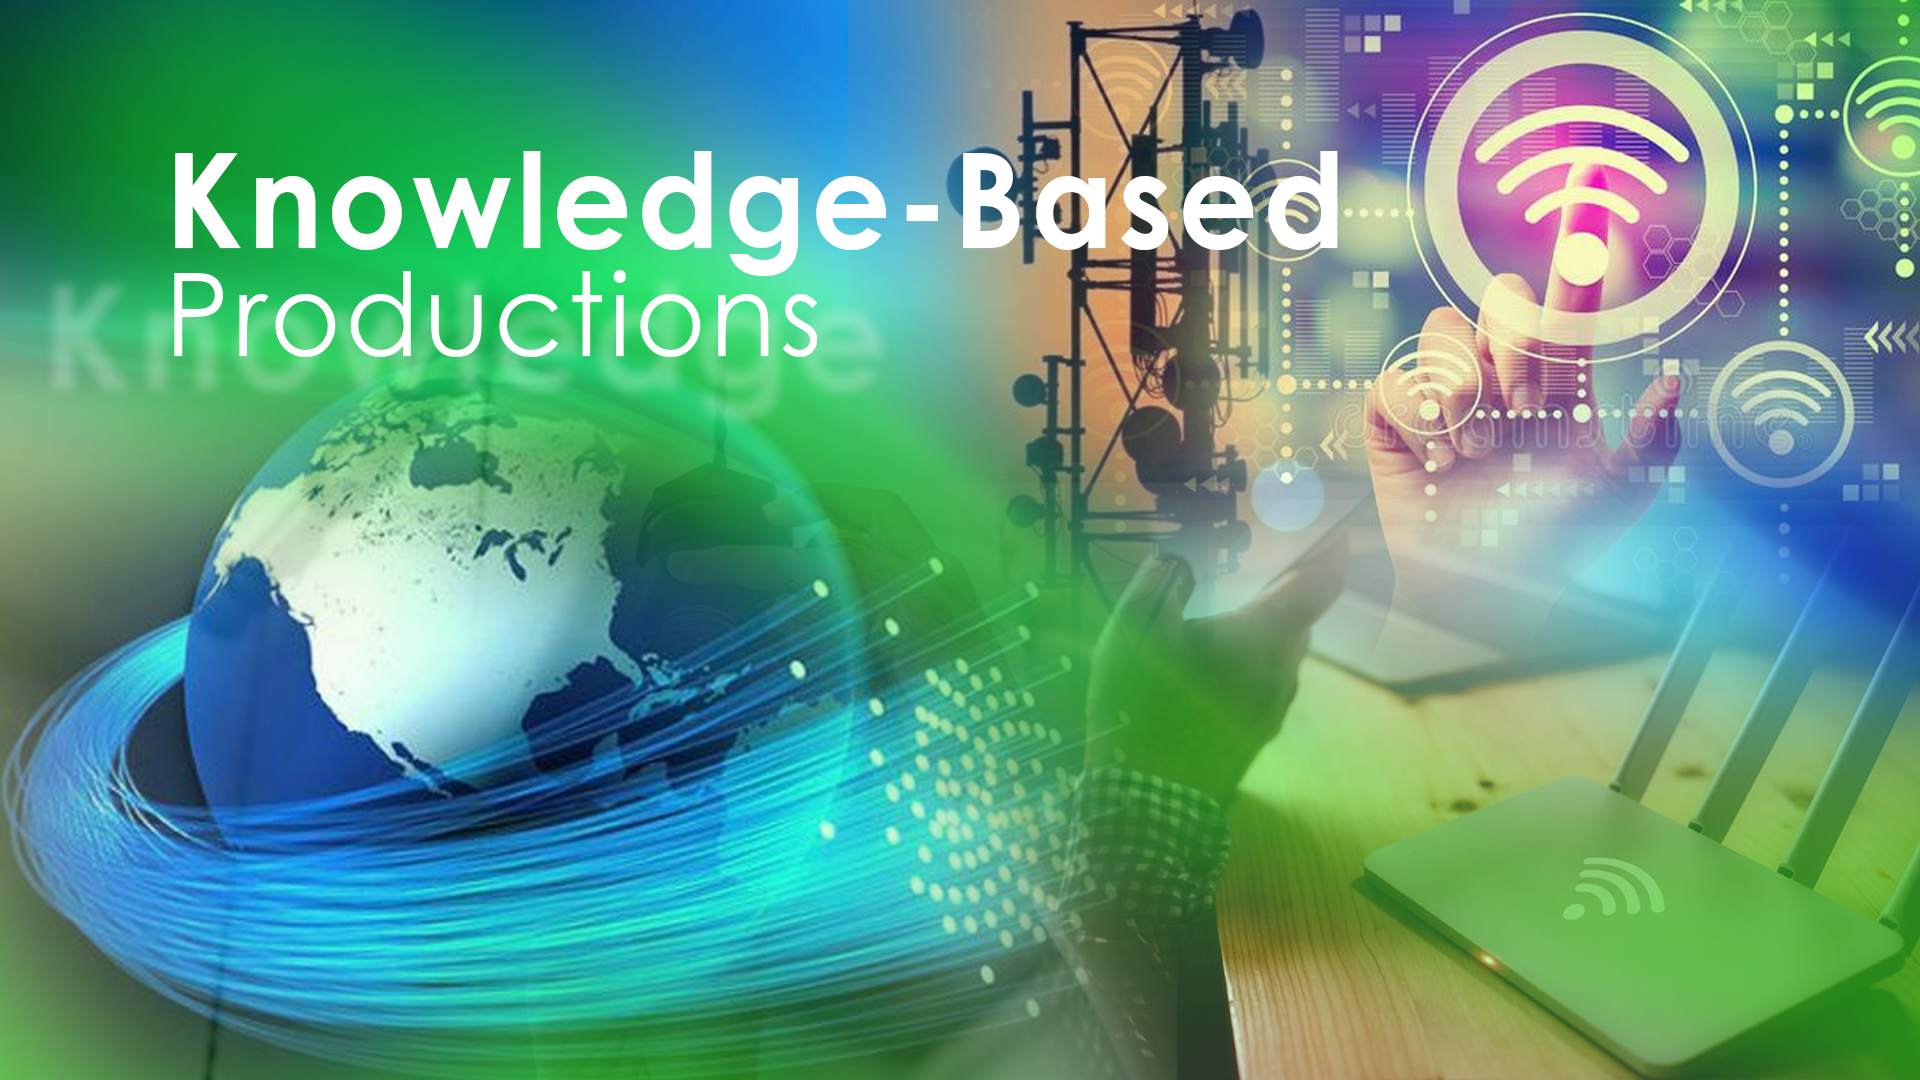 Knowledge-based production